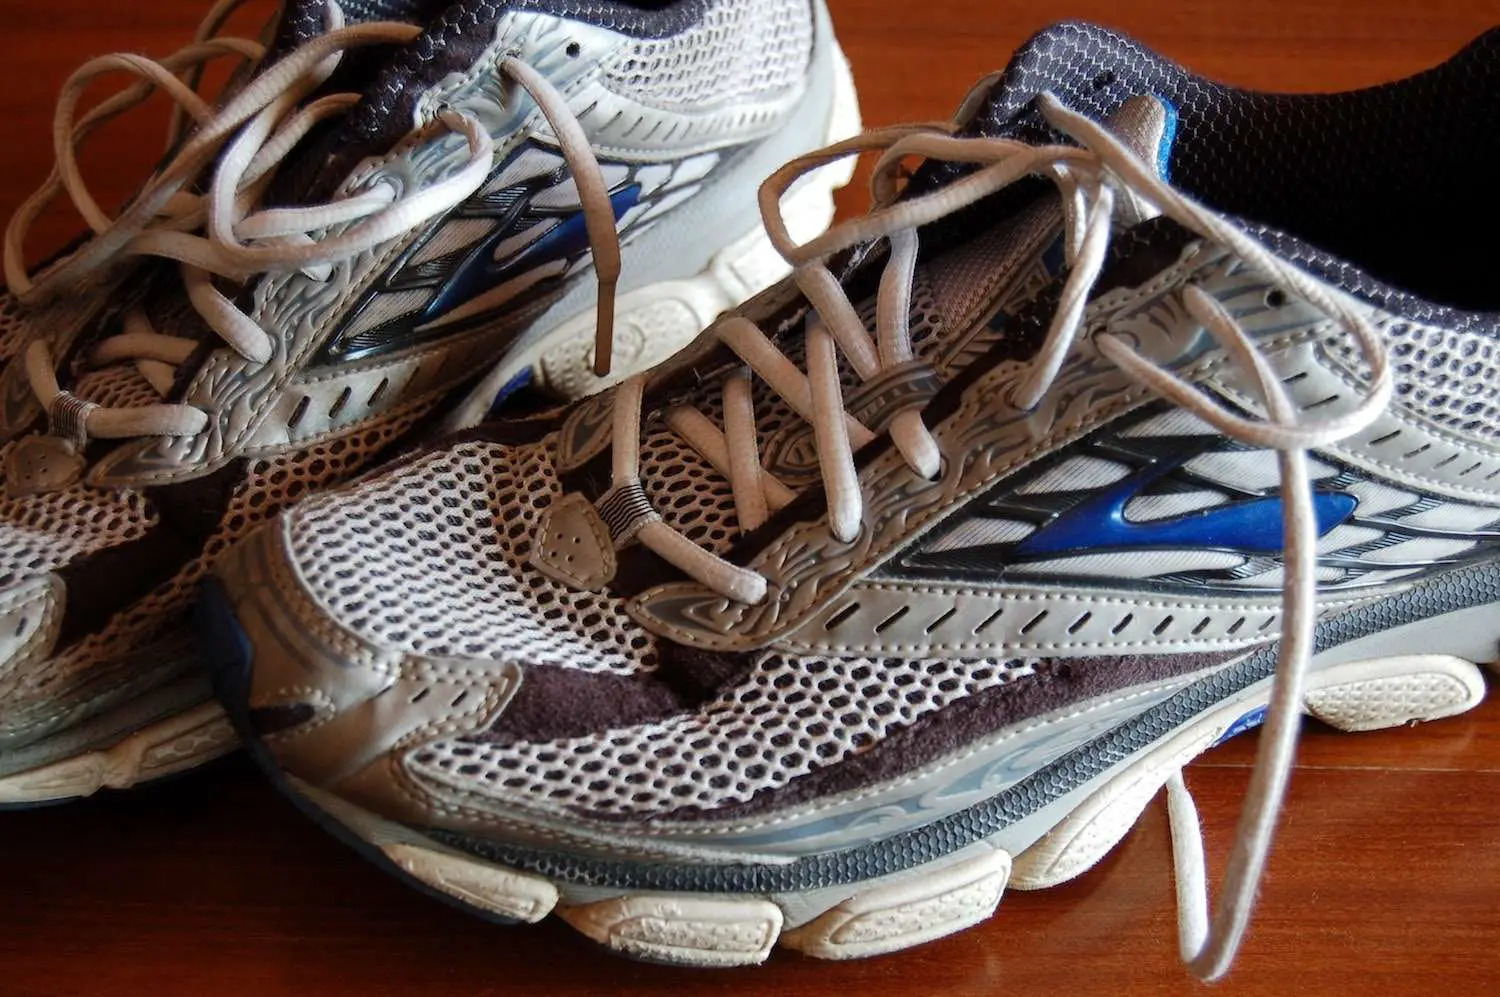 The Iron You: How Often Should I Replace My Running Shoes?